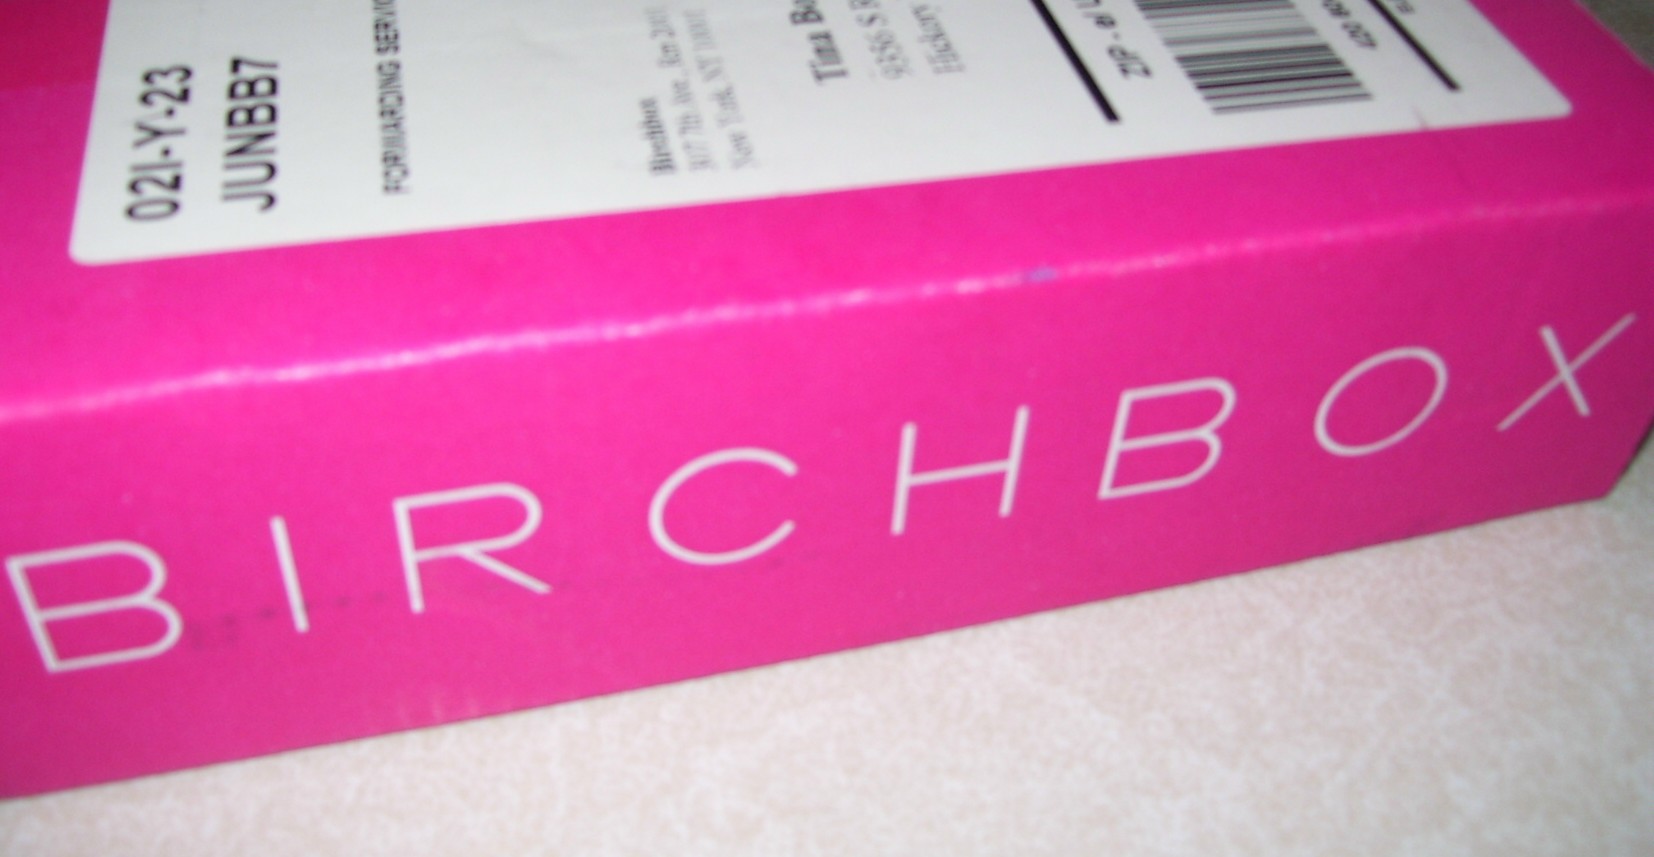 Finally Joined:  Take a Look at My First Birchbox June 2011